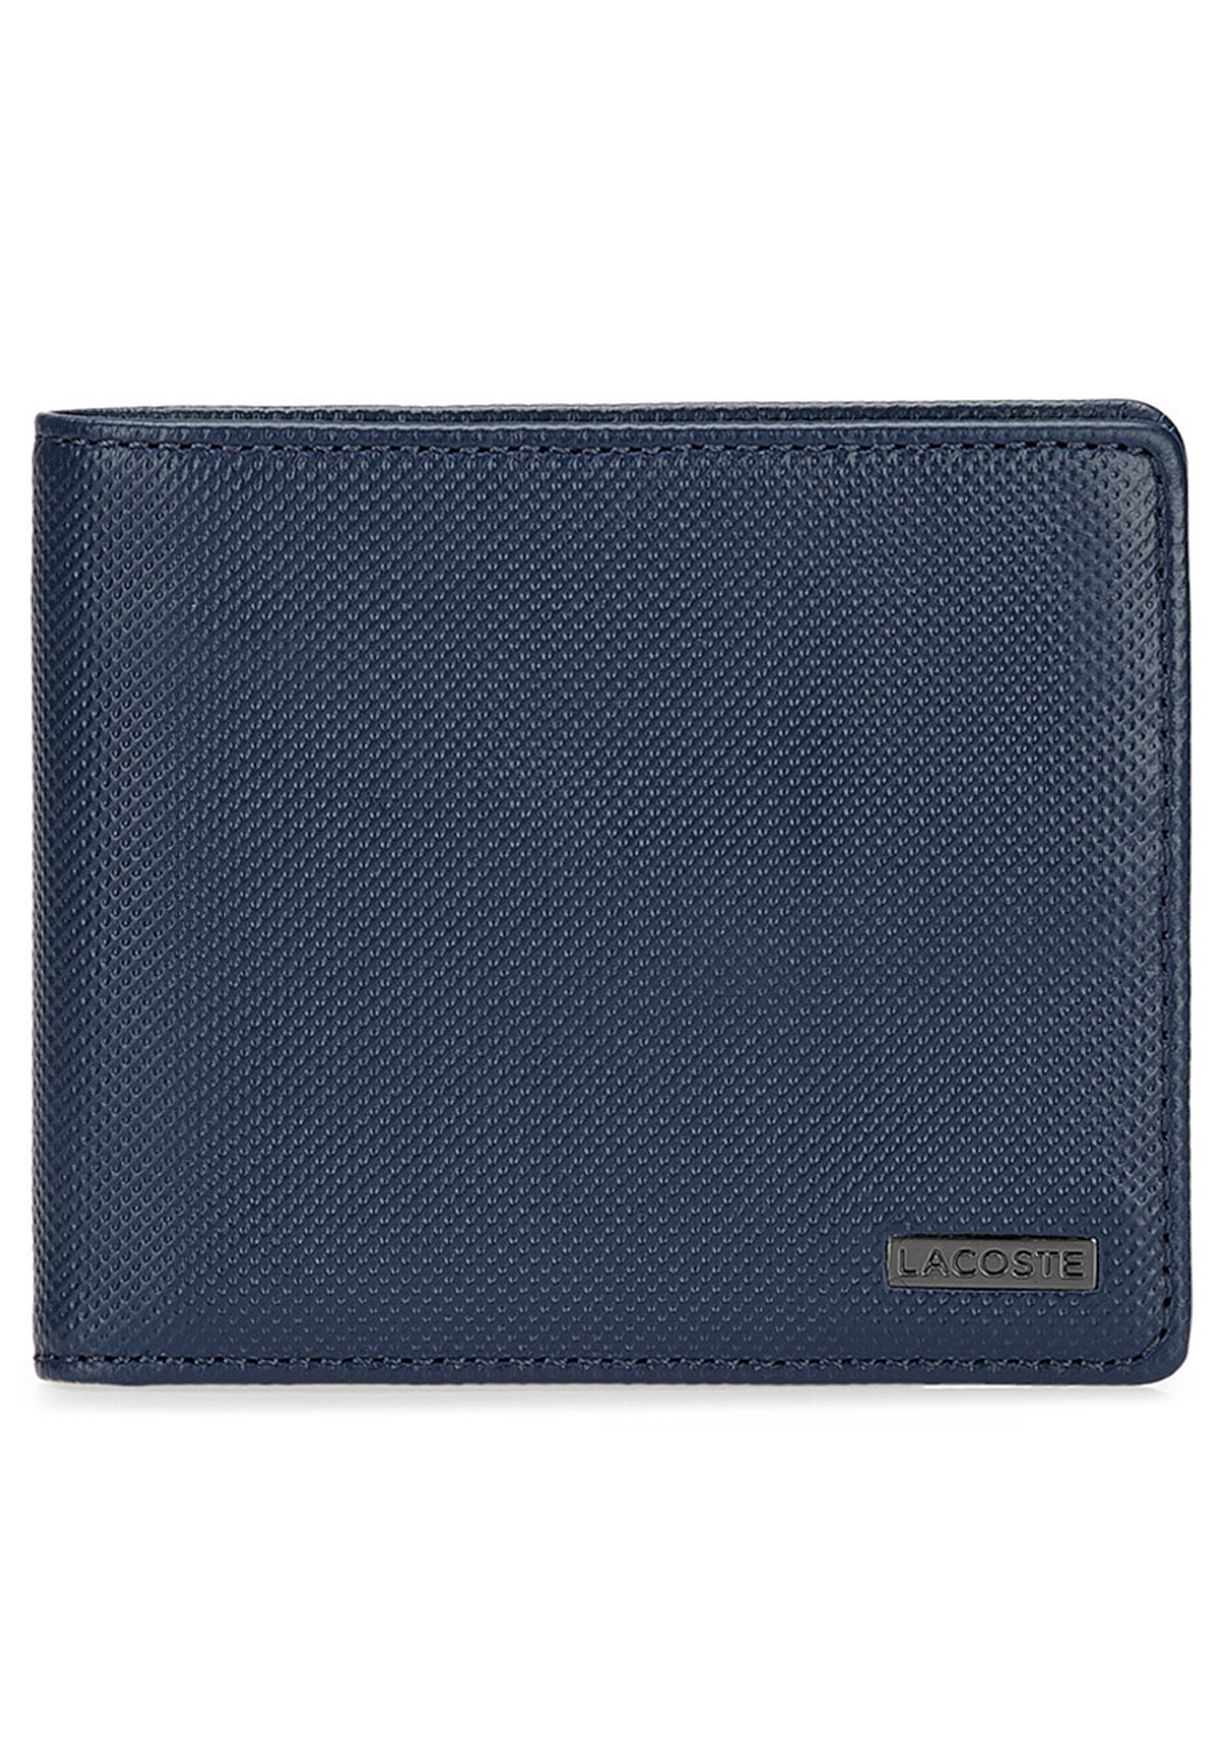 lacoste wallet price